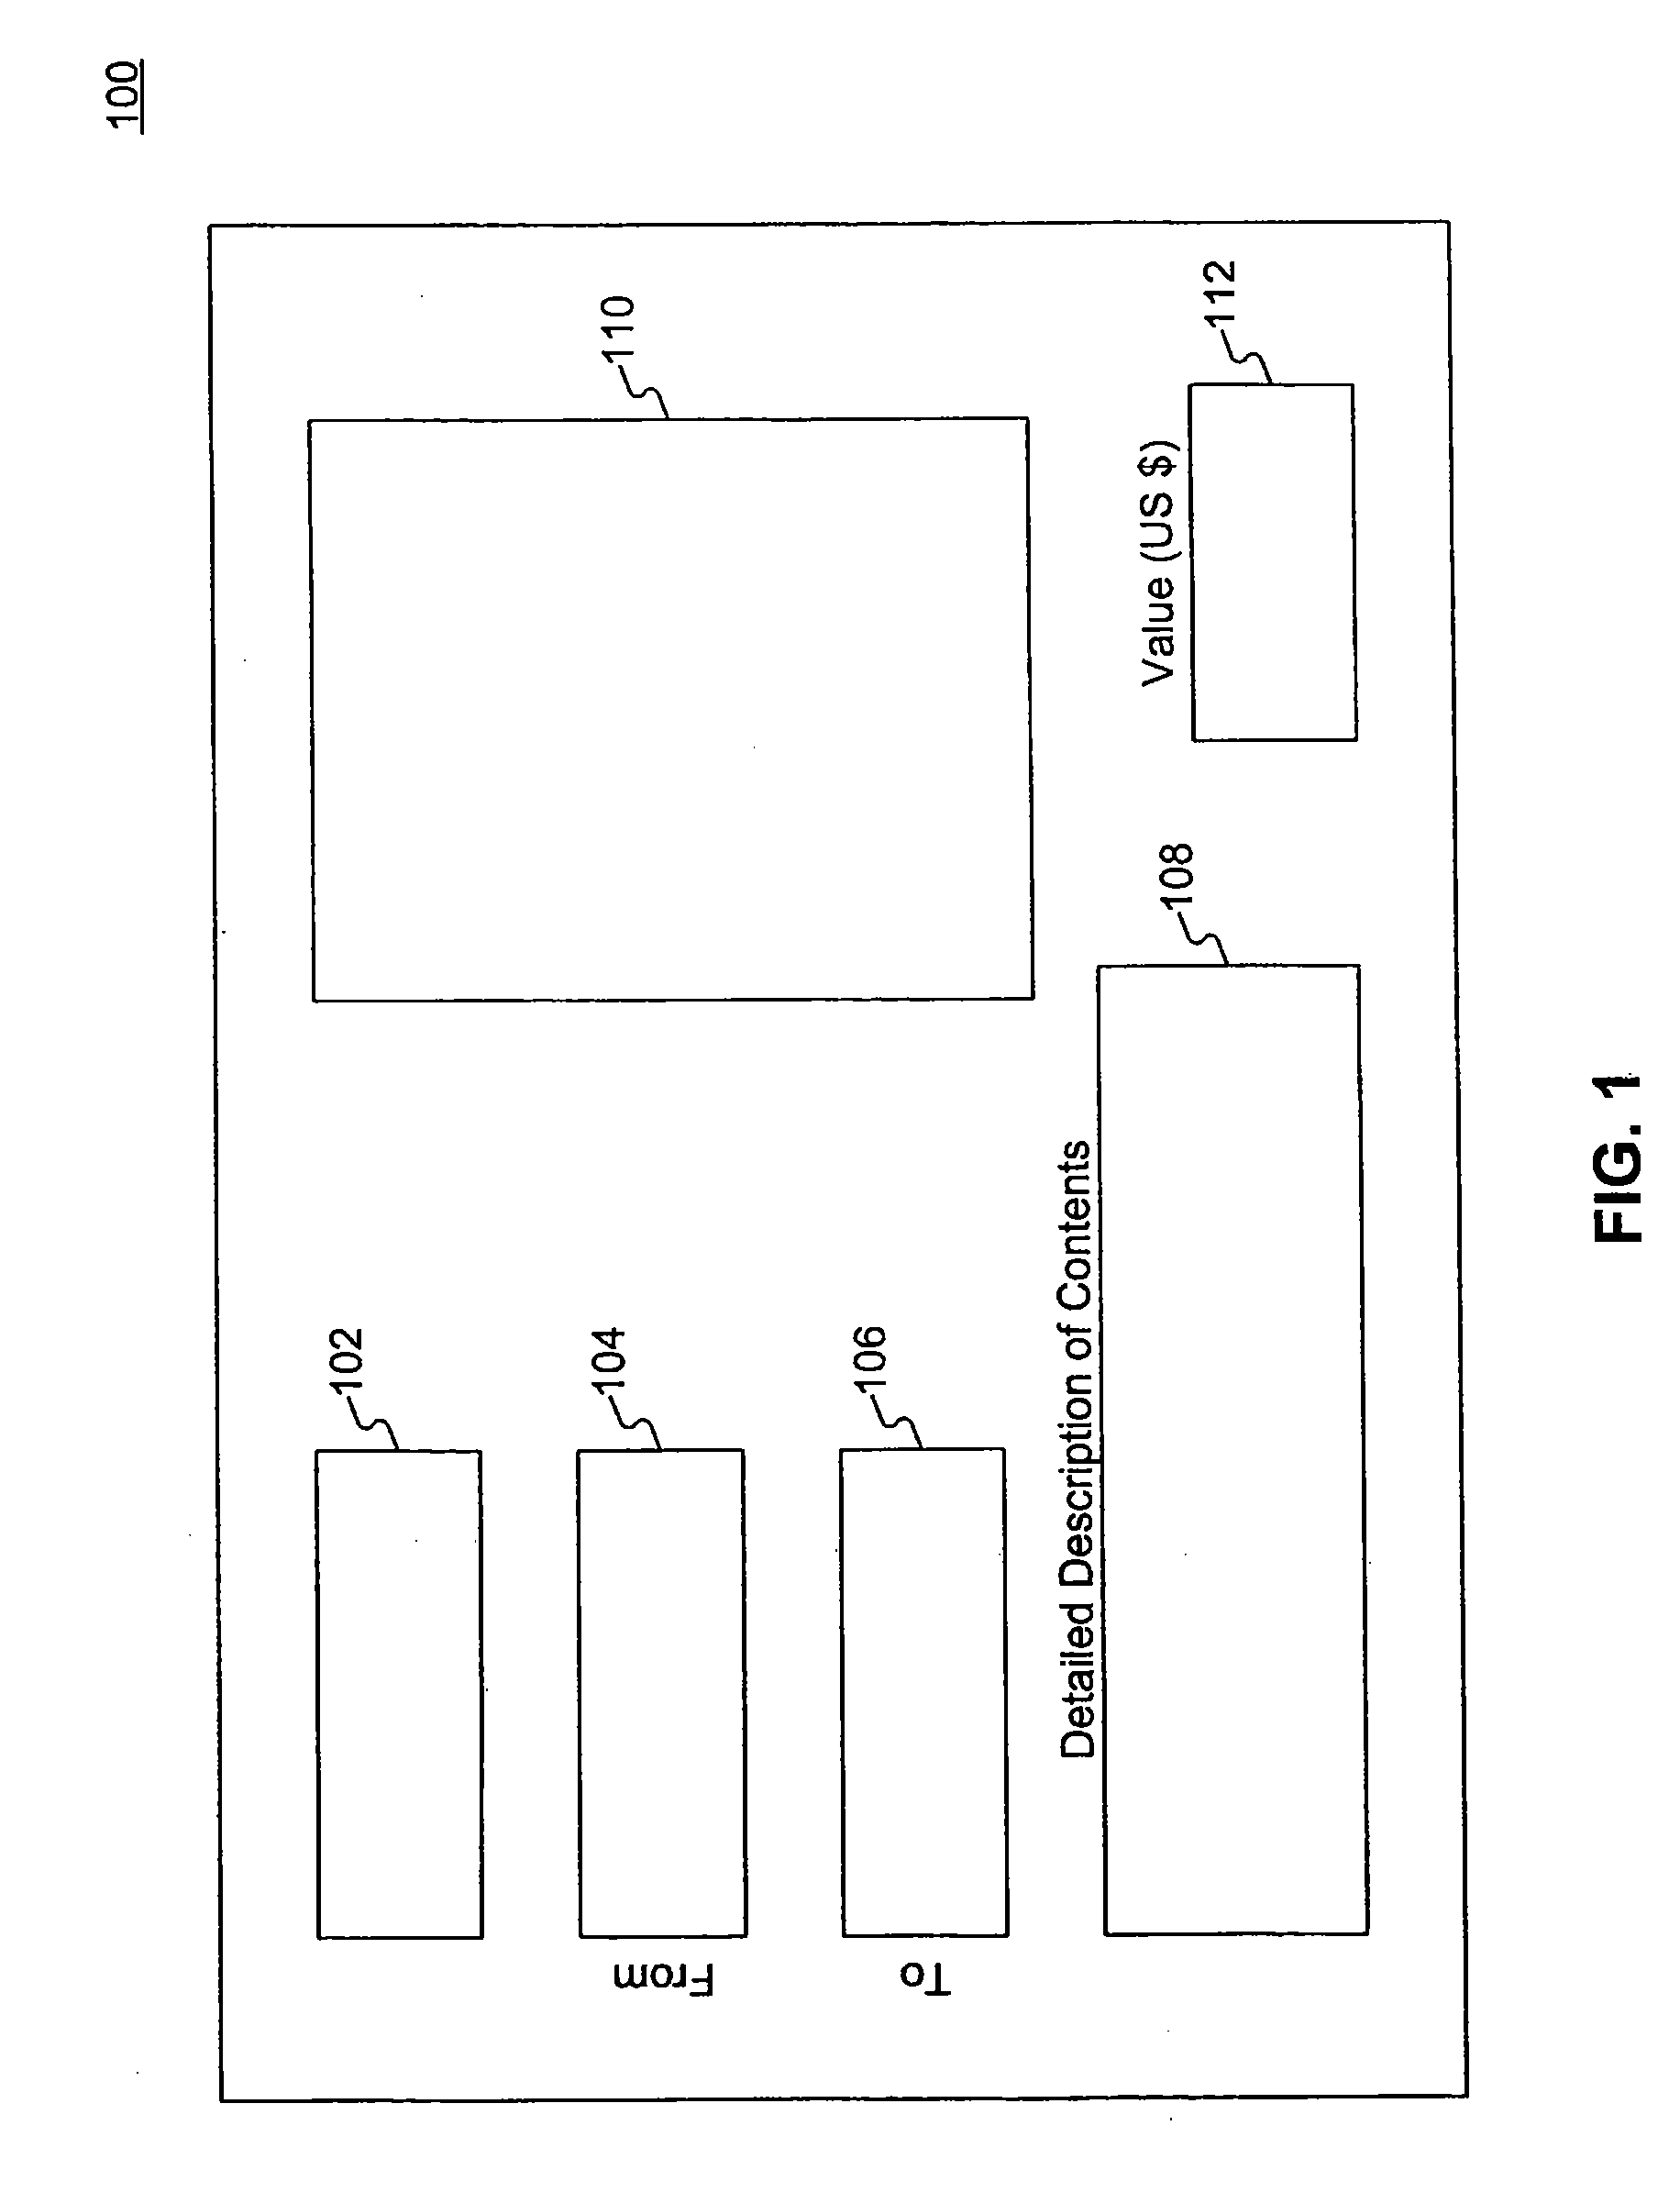 Method and system for providing electronic customs form